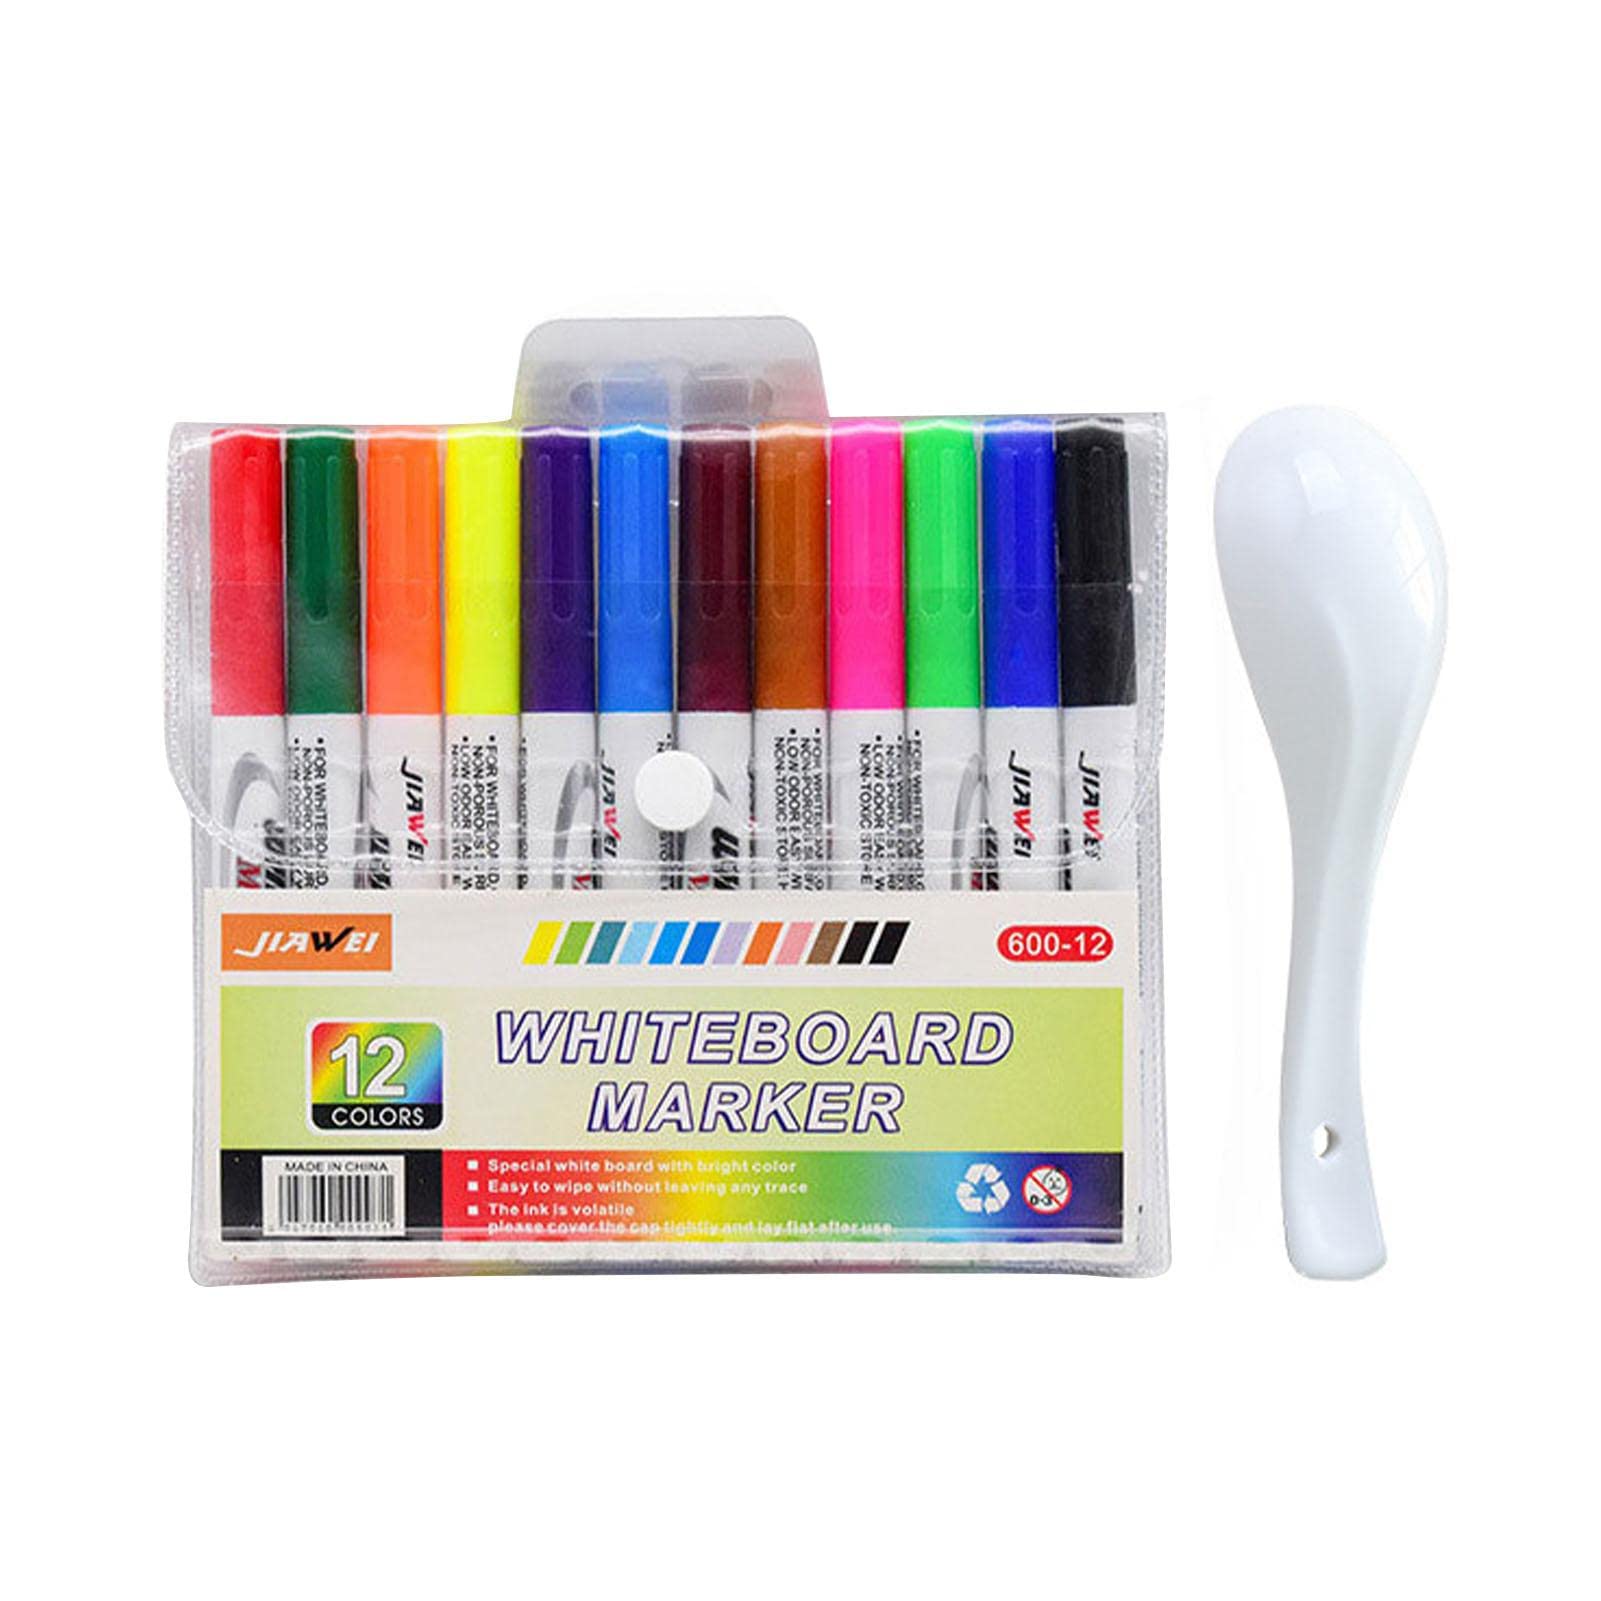 Deli 8/12 Colors Magical Water Painting Pen Water Floating Doodle